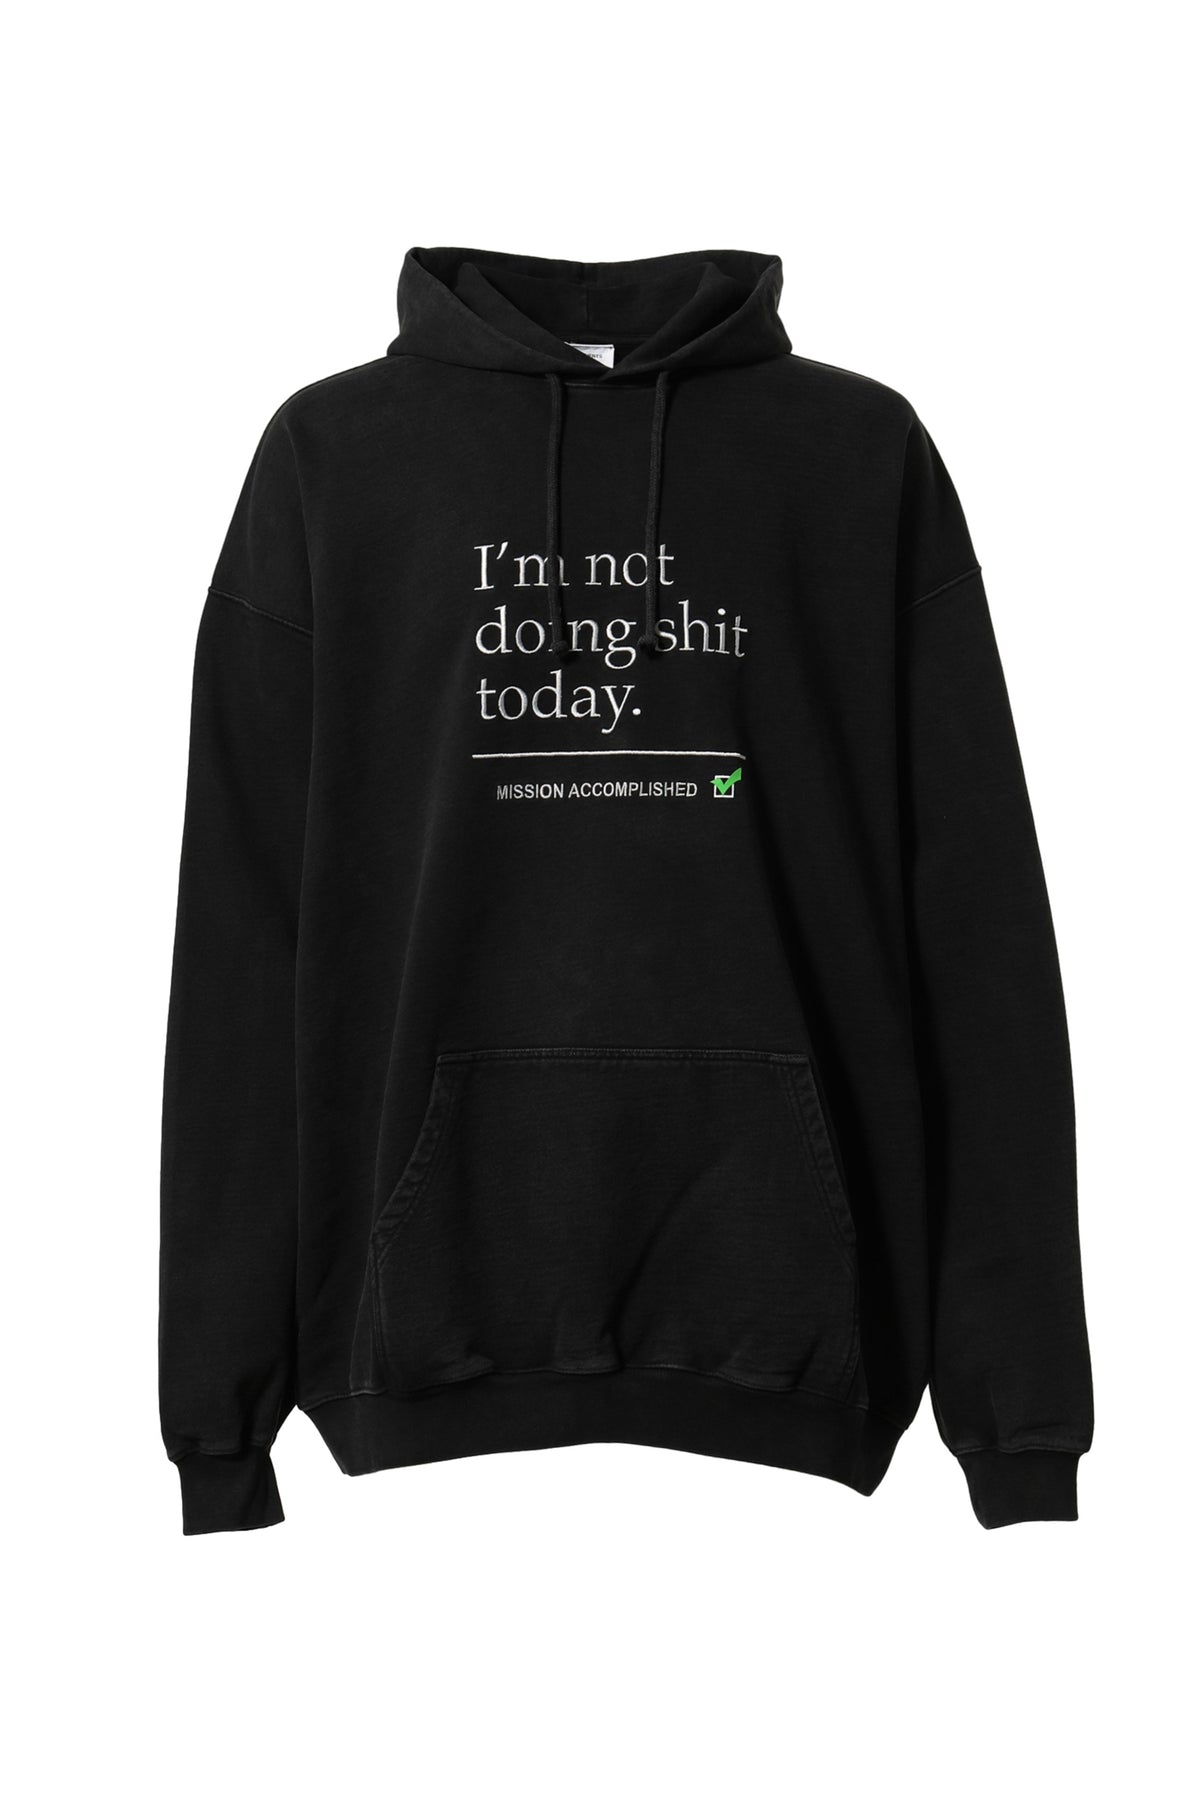 NOT DOING SHIT TODAY HOODIE / WASHED BLK